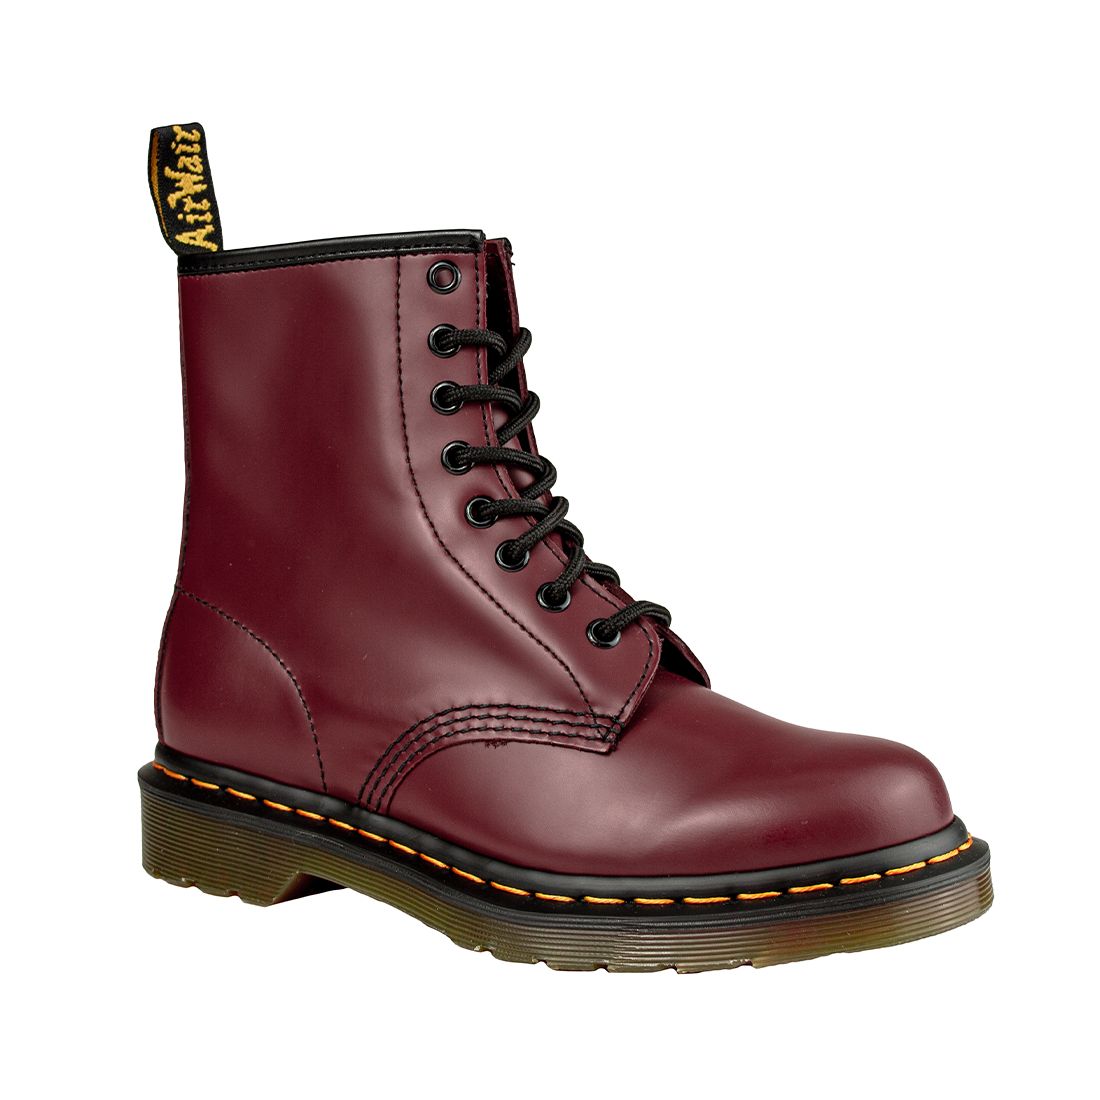 DR.MARTENS 1460 CHERRY RED 11822600 SMOOTH